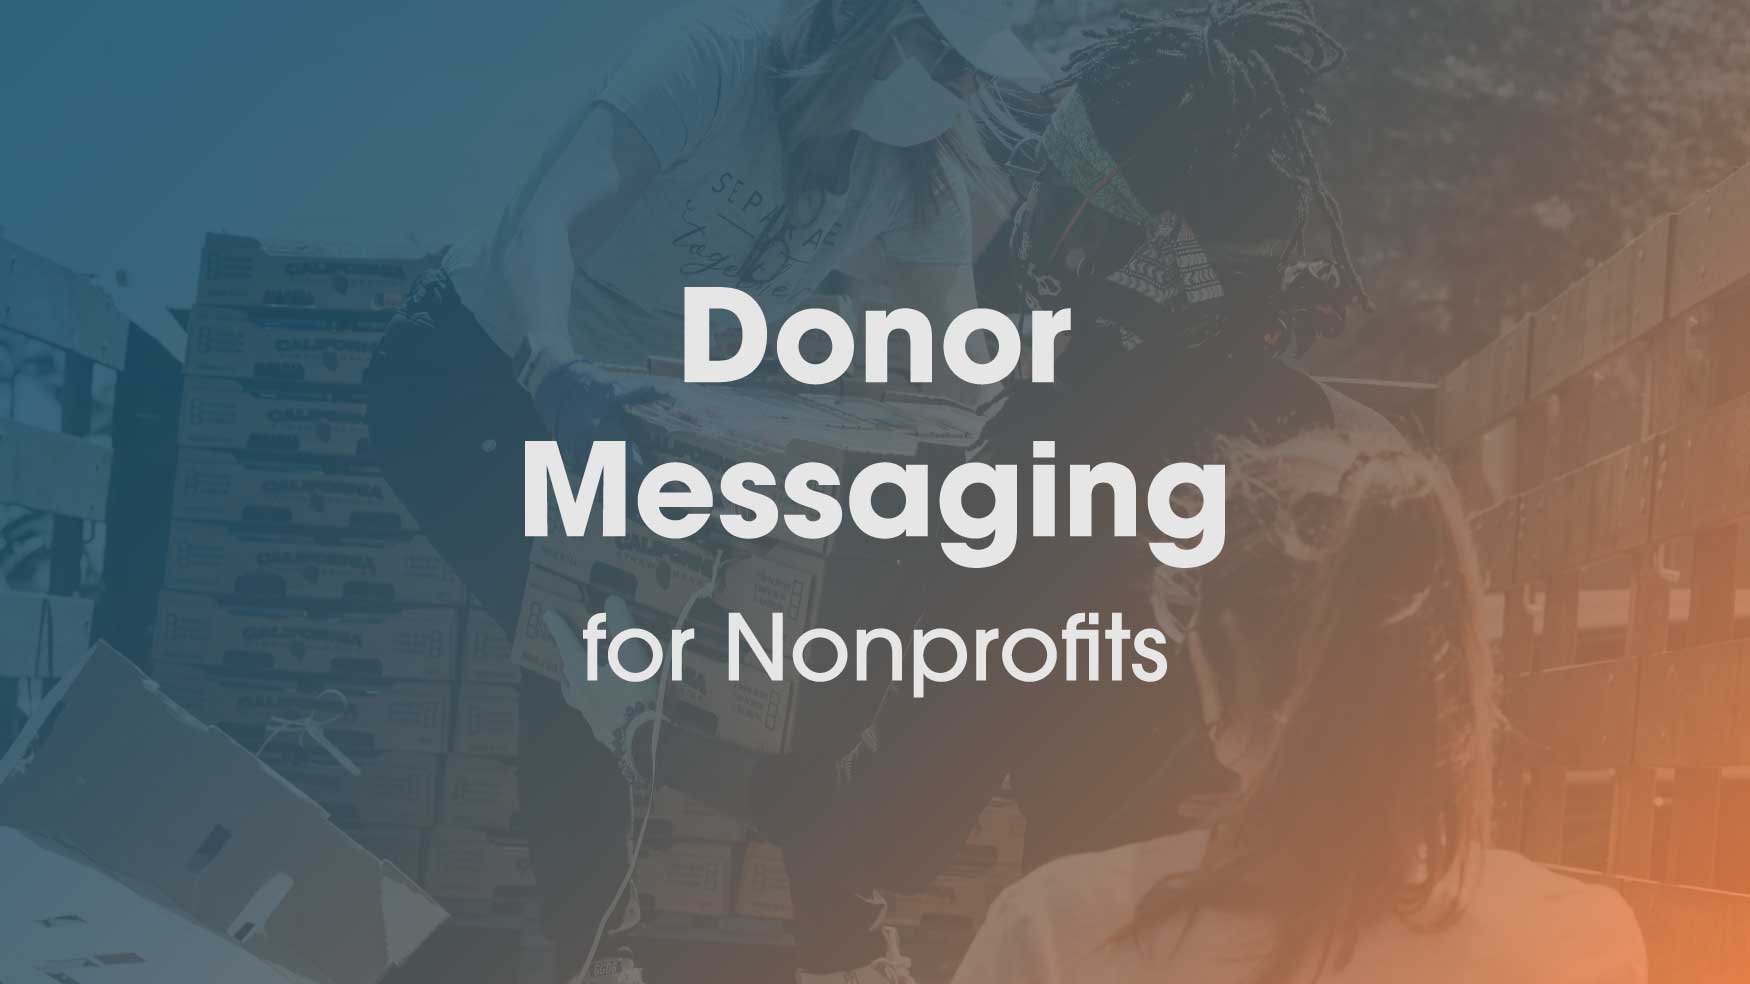 Donor Messaging for Nonprofits